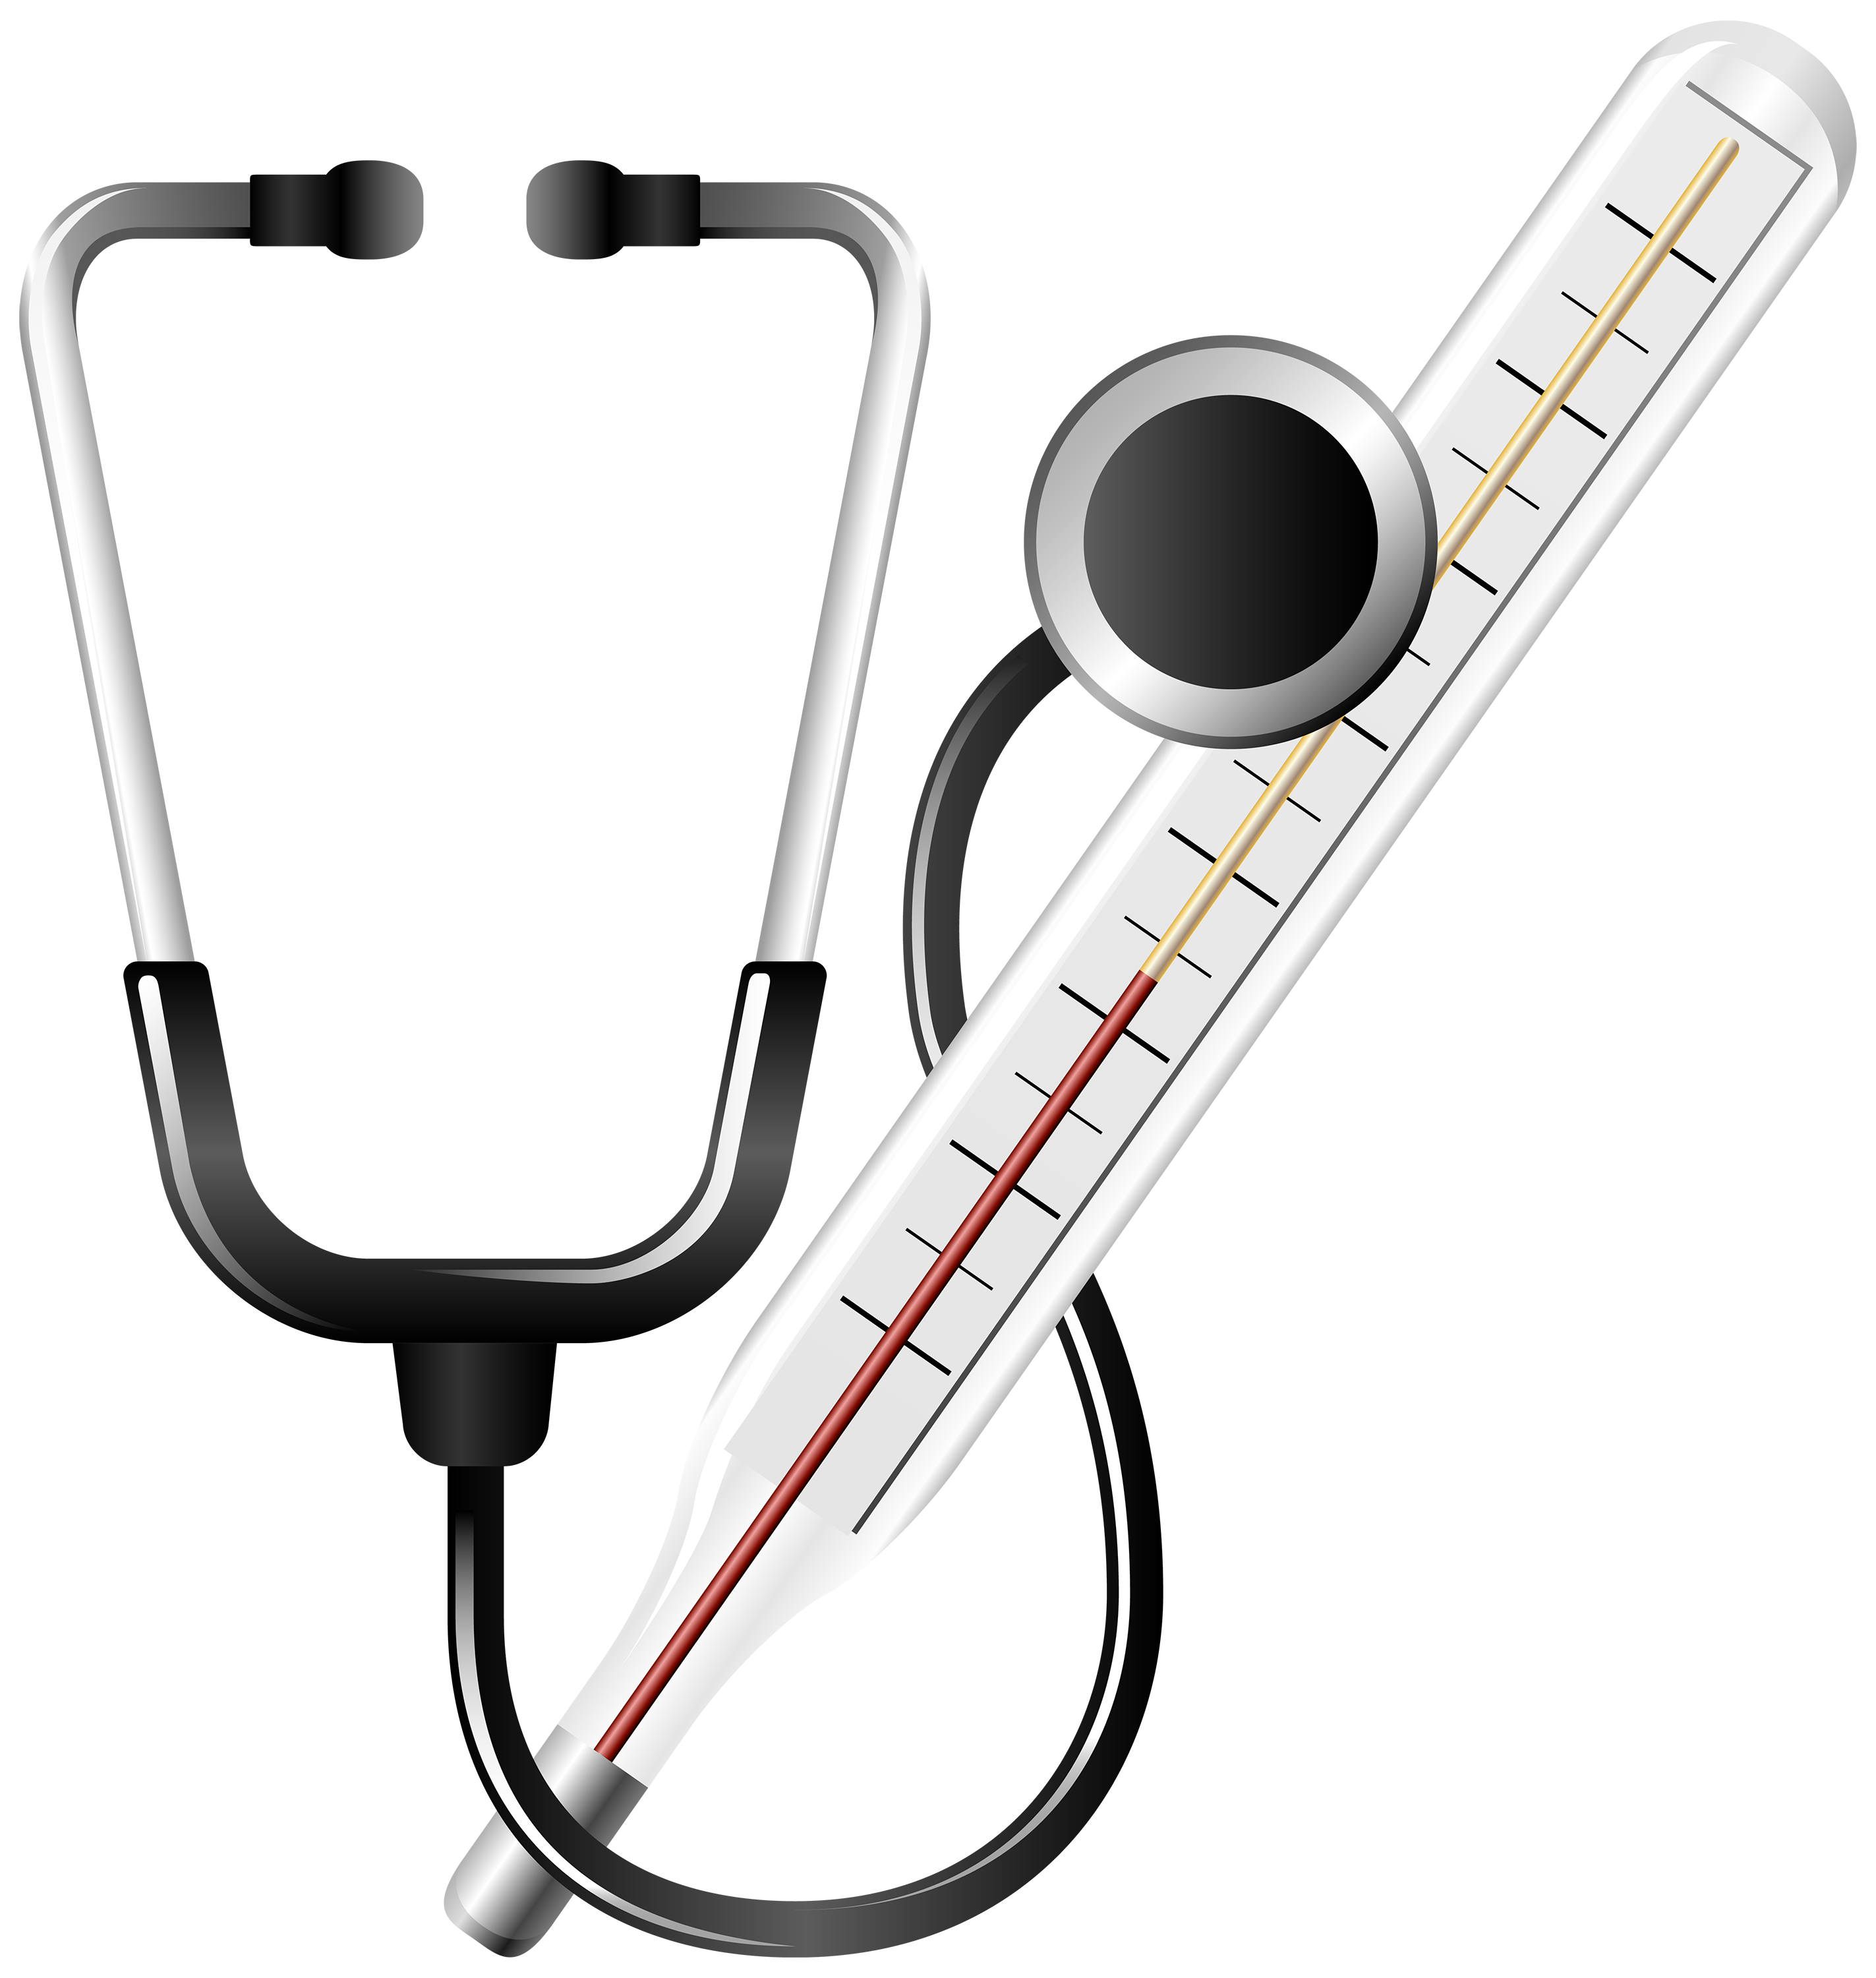 Syringe clipart medical assistant. Stethoscope and thermometer png